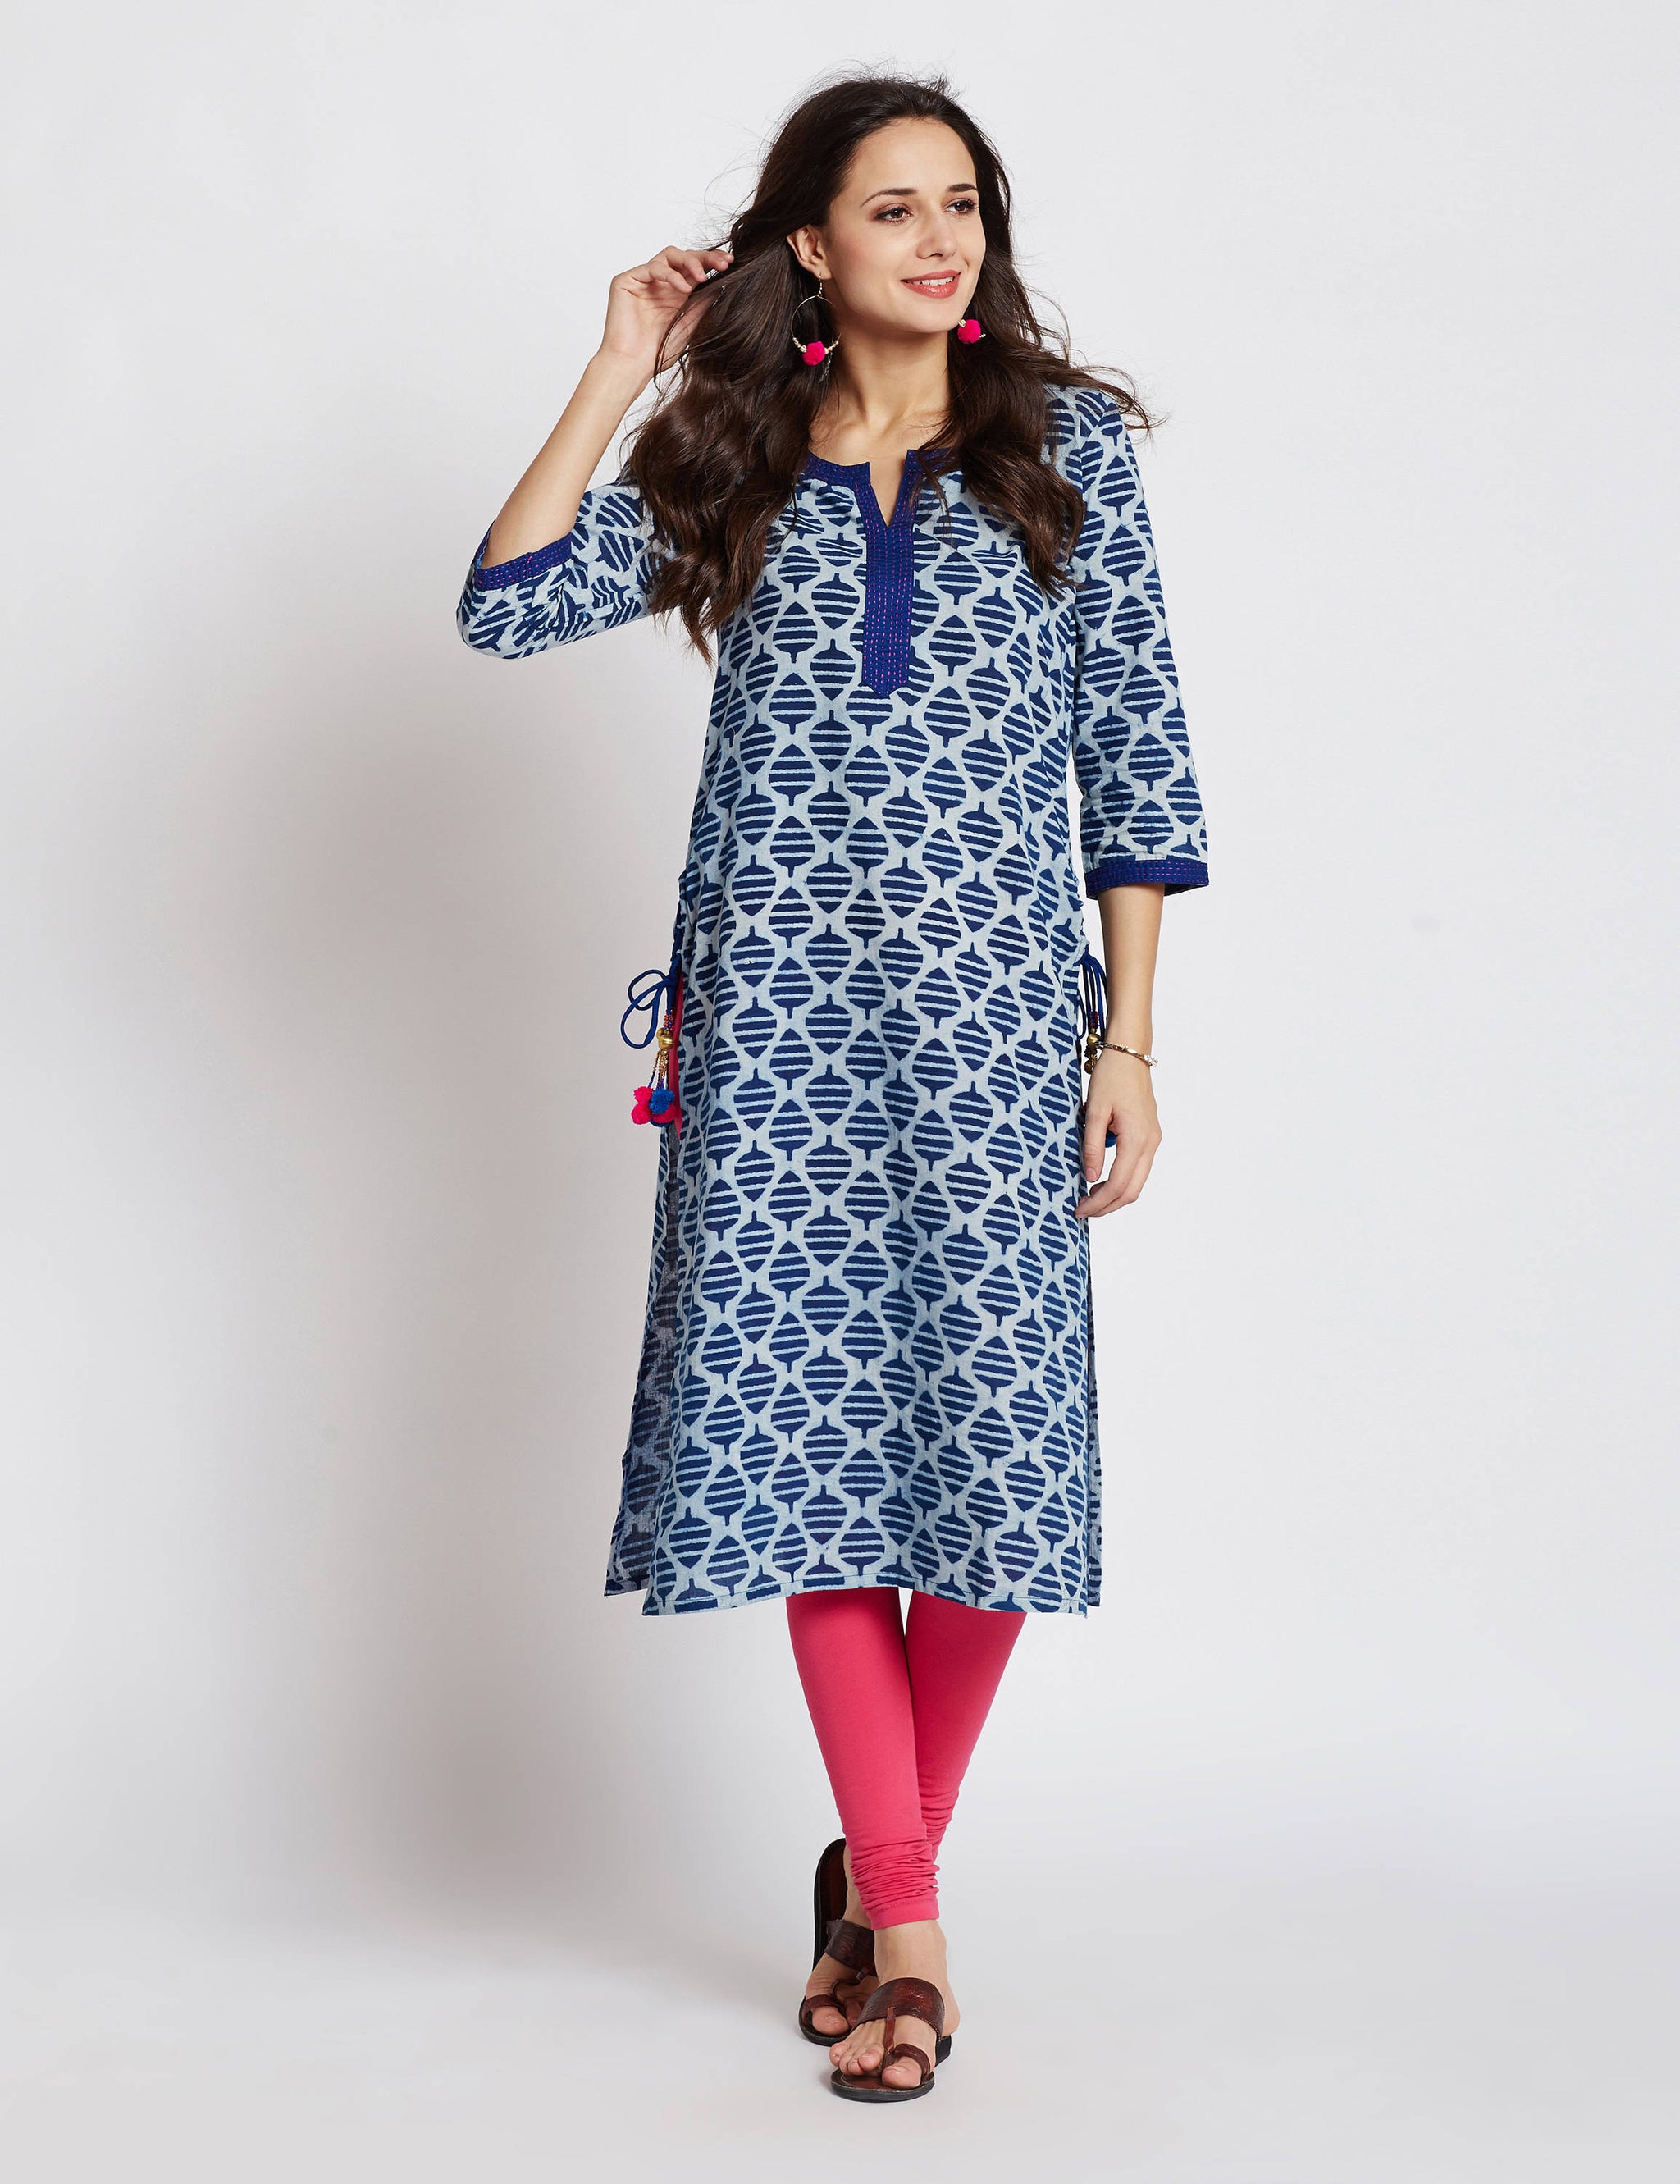 Indigo Hand block printed ethnic long Indian kurta with side tassels and hand embroidery on neck and sleeves